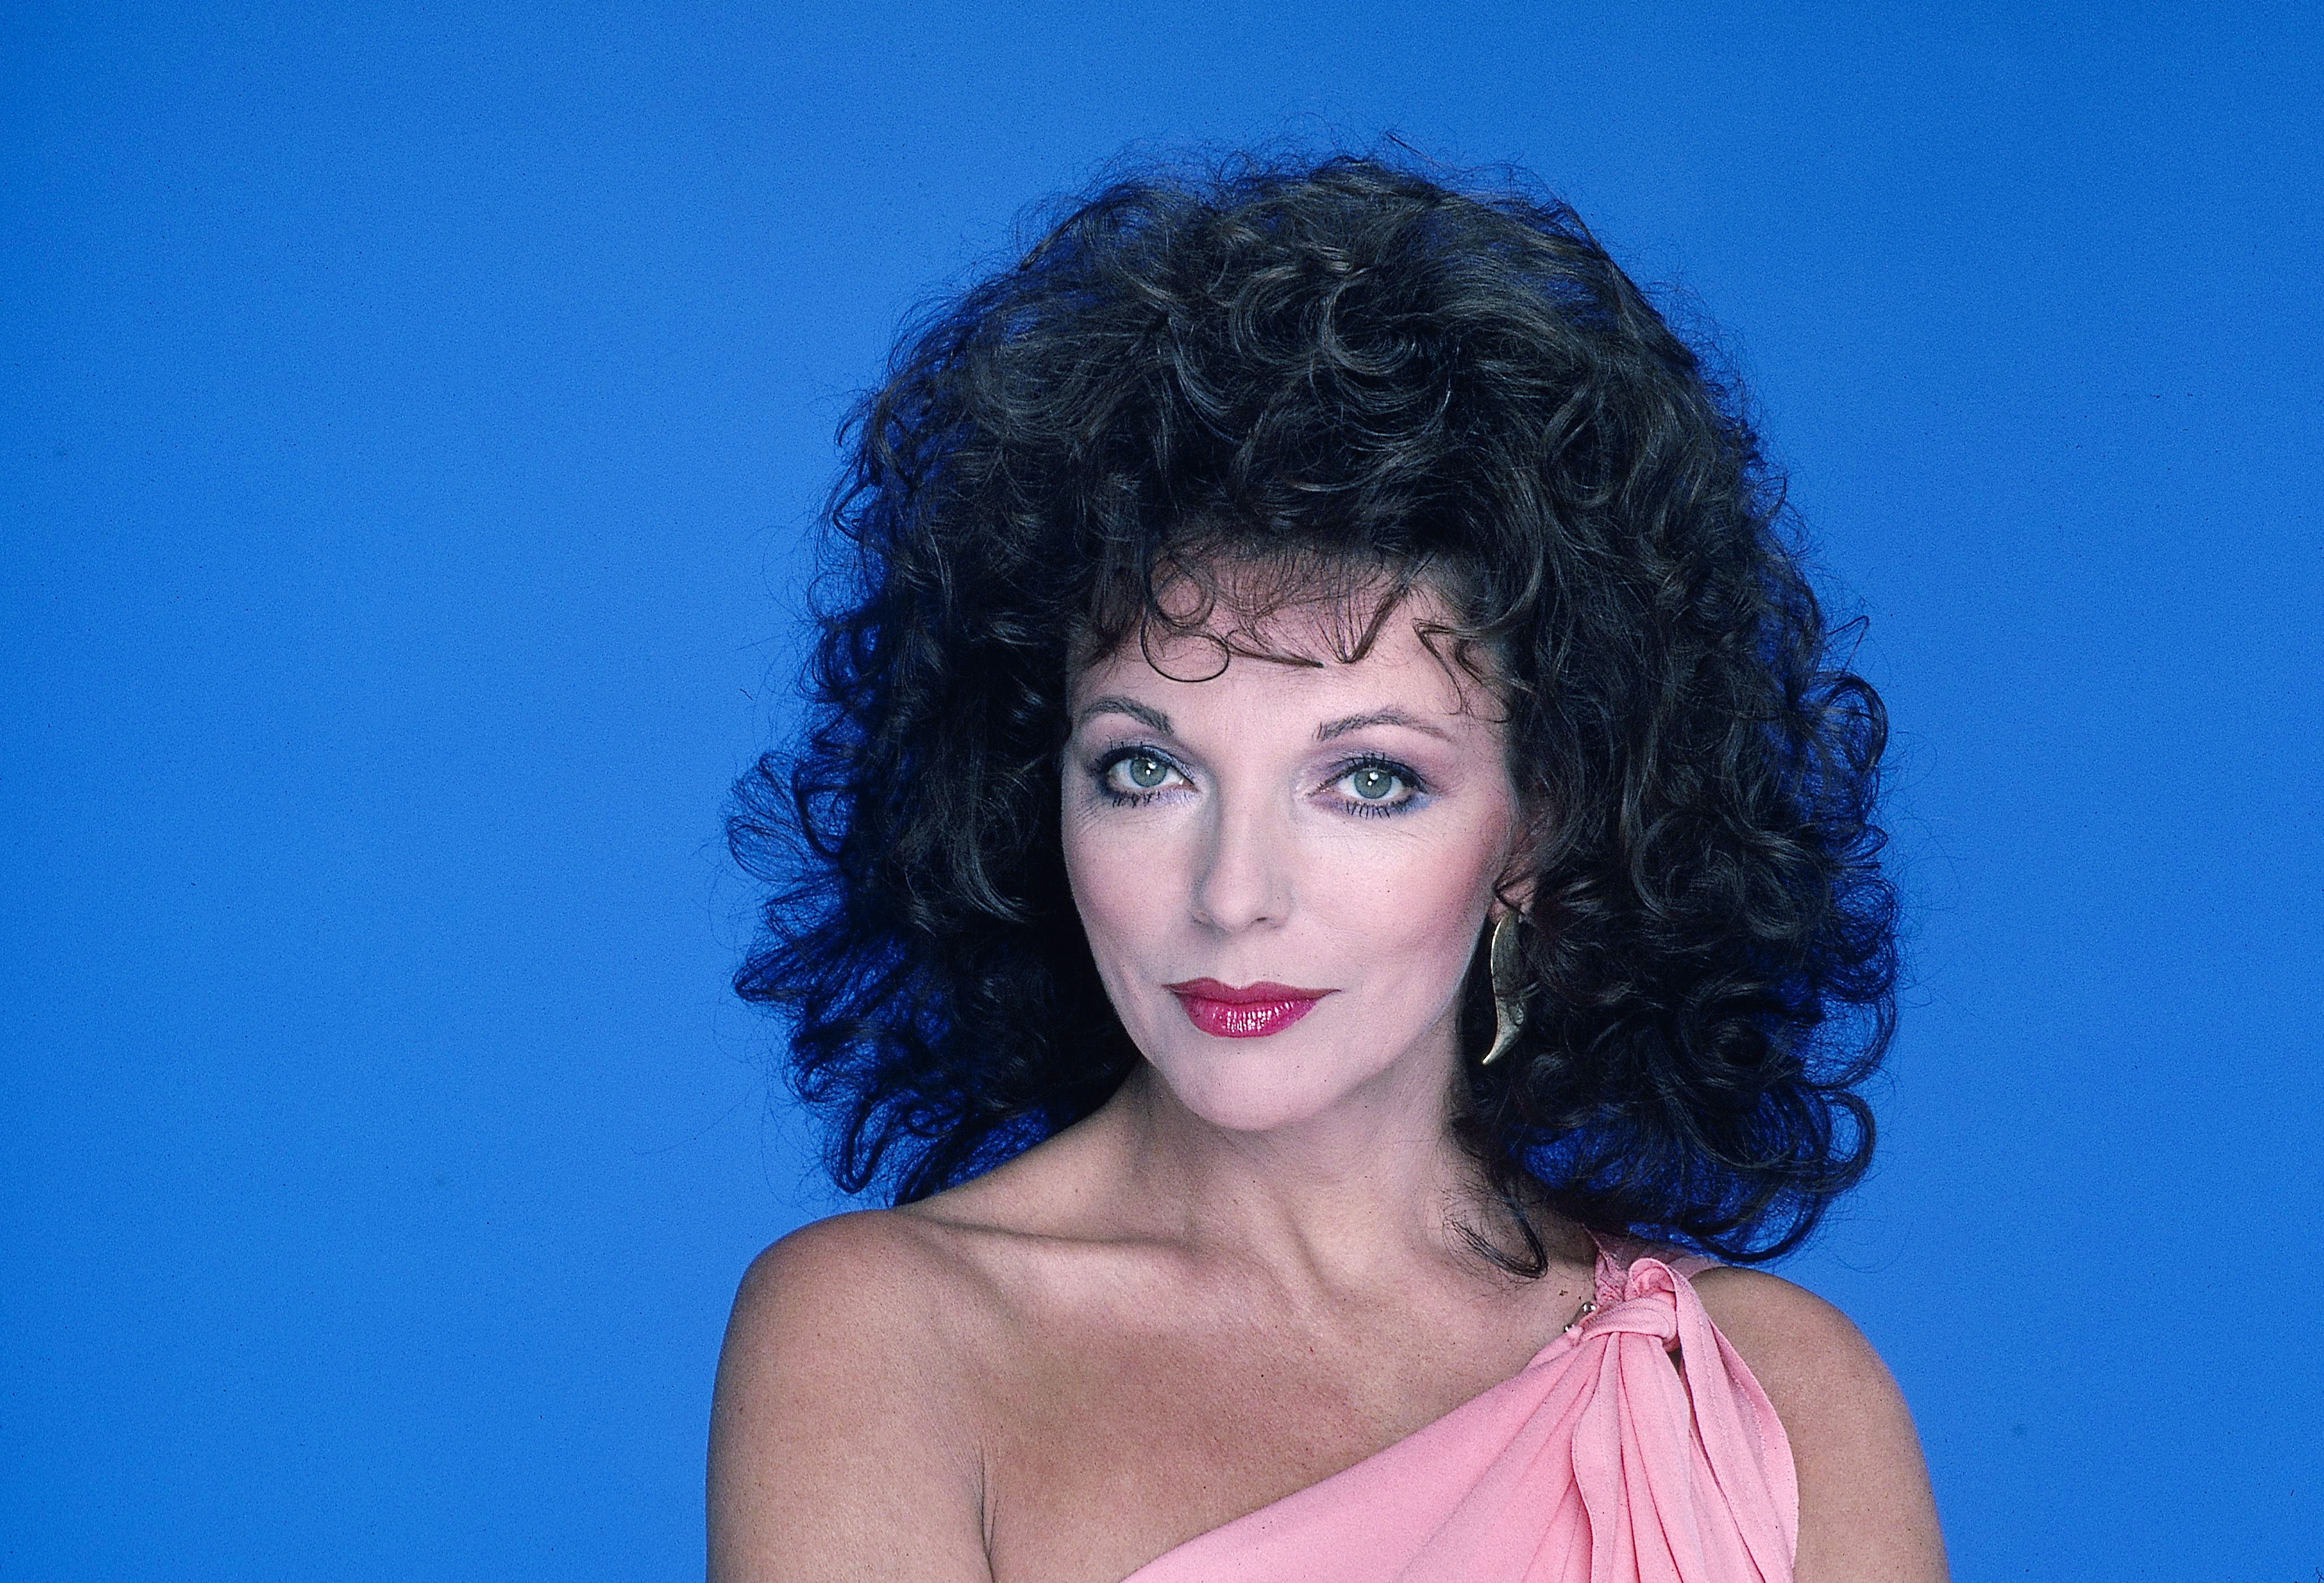 Joan Collins on "Dynasty." August 31, 1982 | Source: Getty Images